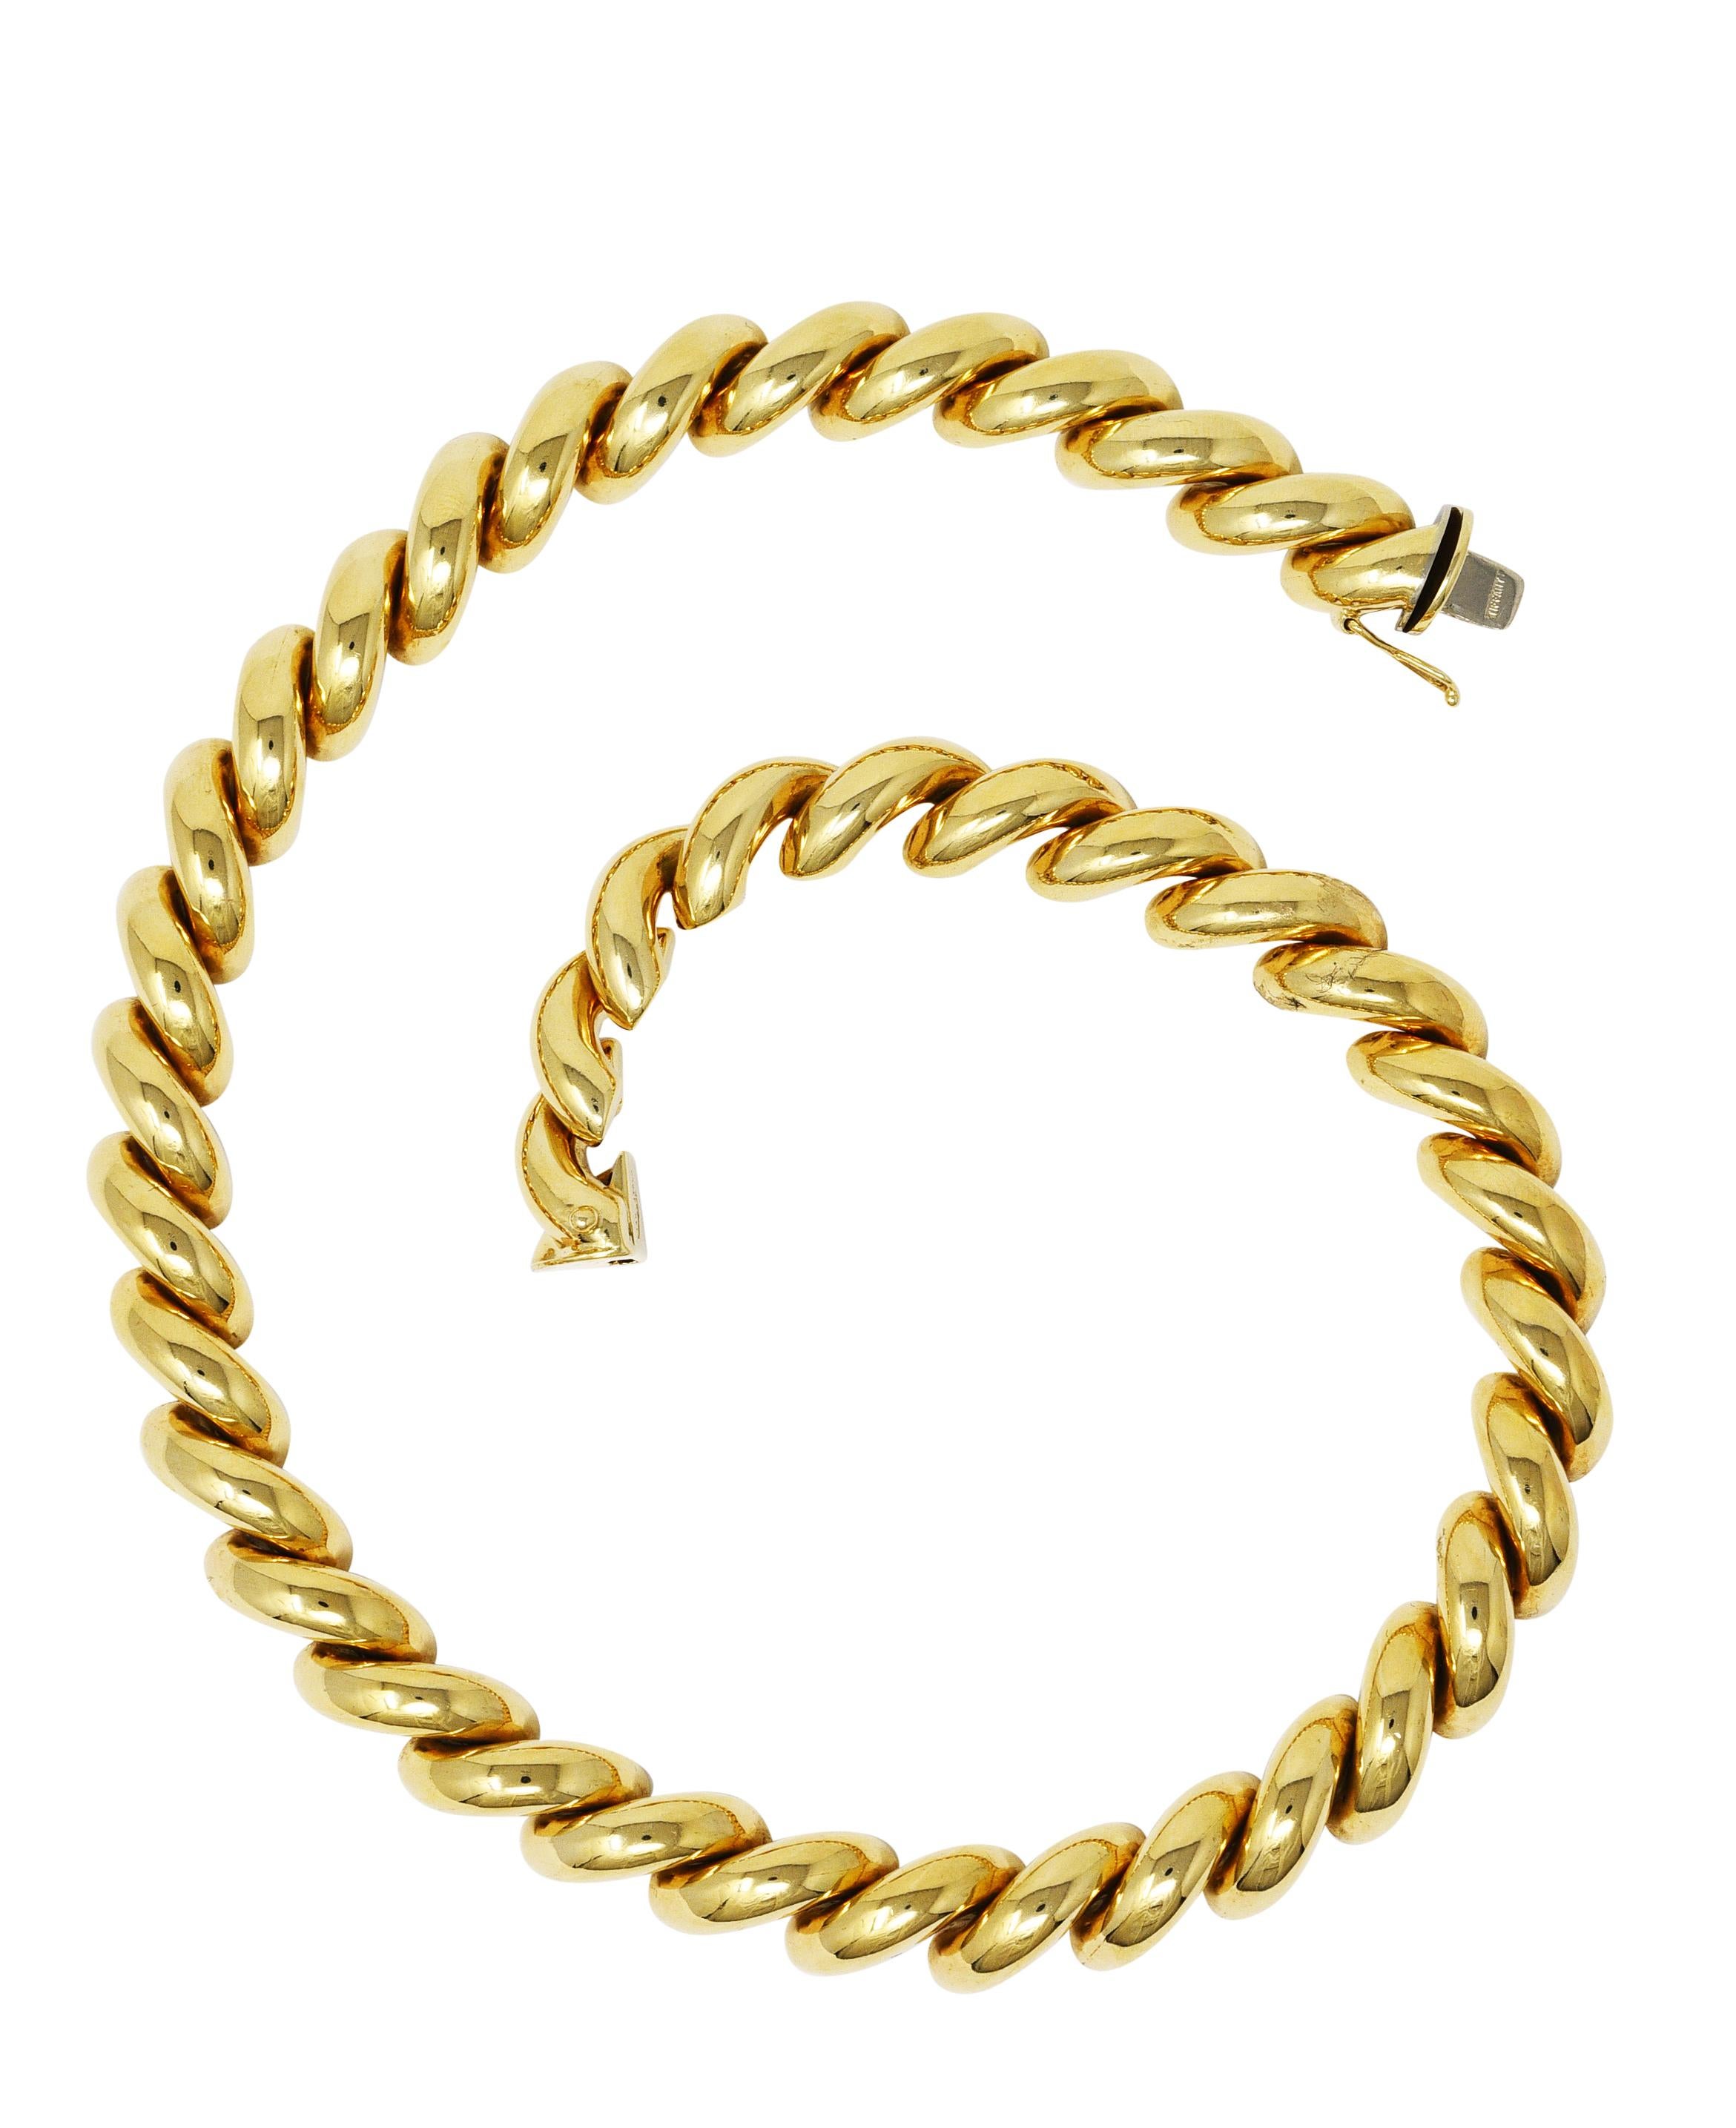 Comprised of puffed half-round links arranged as a twist motif. Featuring a high polished finish. Completed by hidden clasp closure with figure eight safety. Stamped 14k for 14 karat gold. Fully signed Tiffany, Italy. Circa: 1960's. Width at widest: